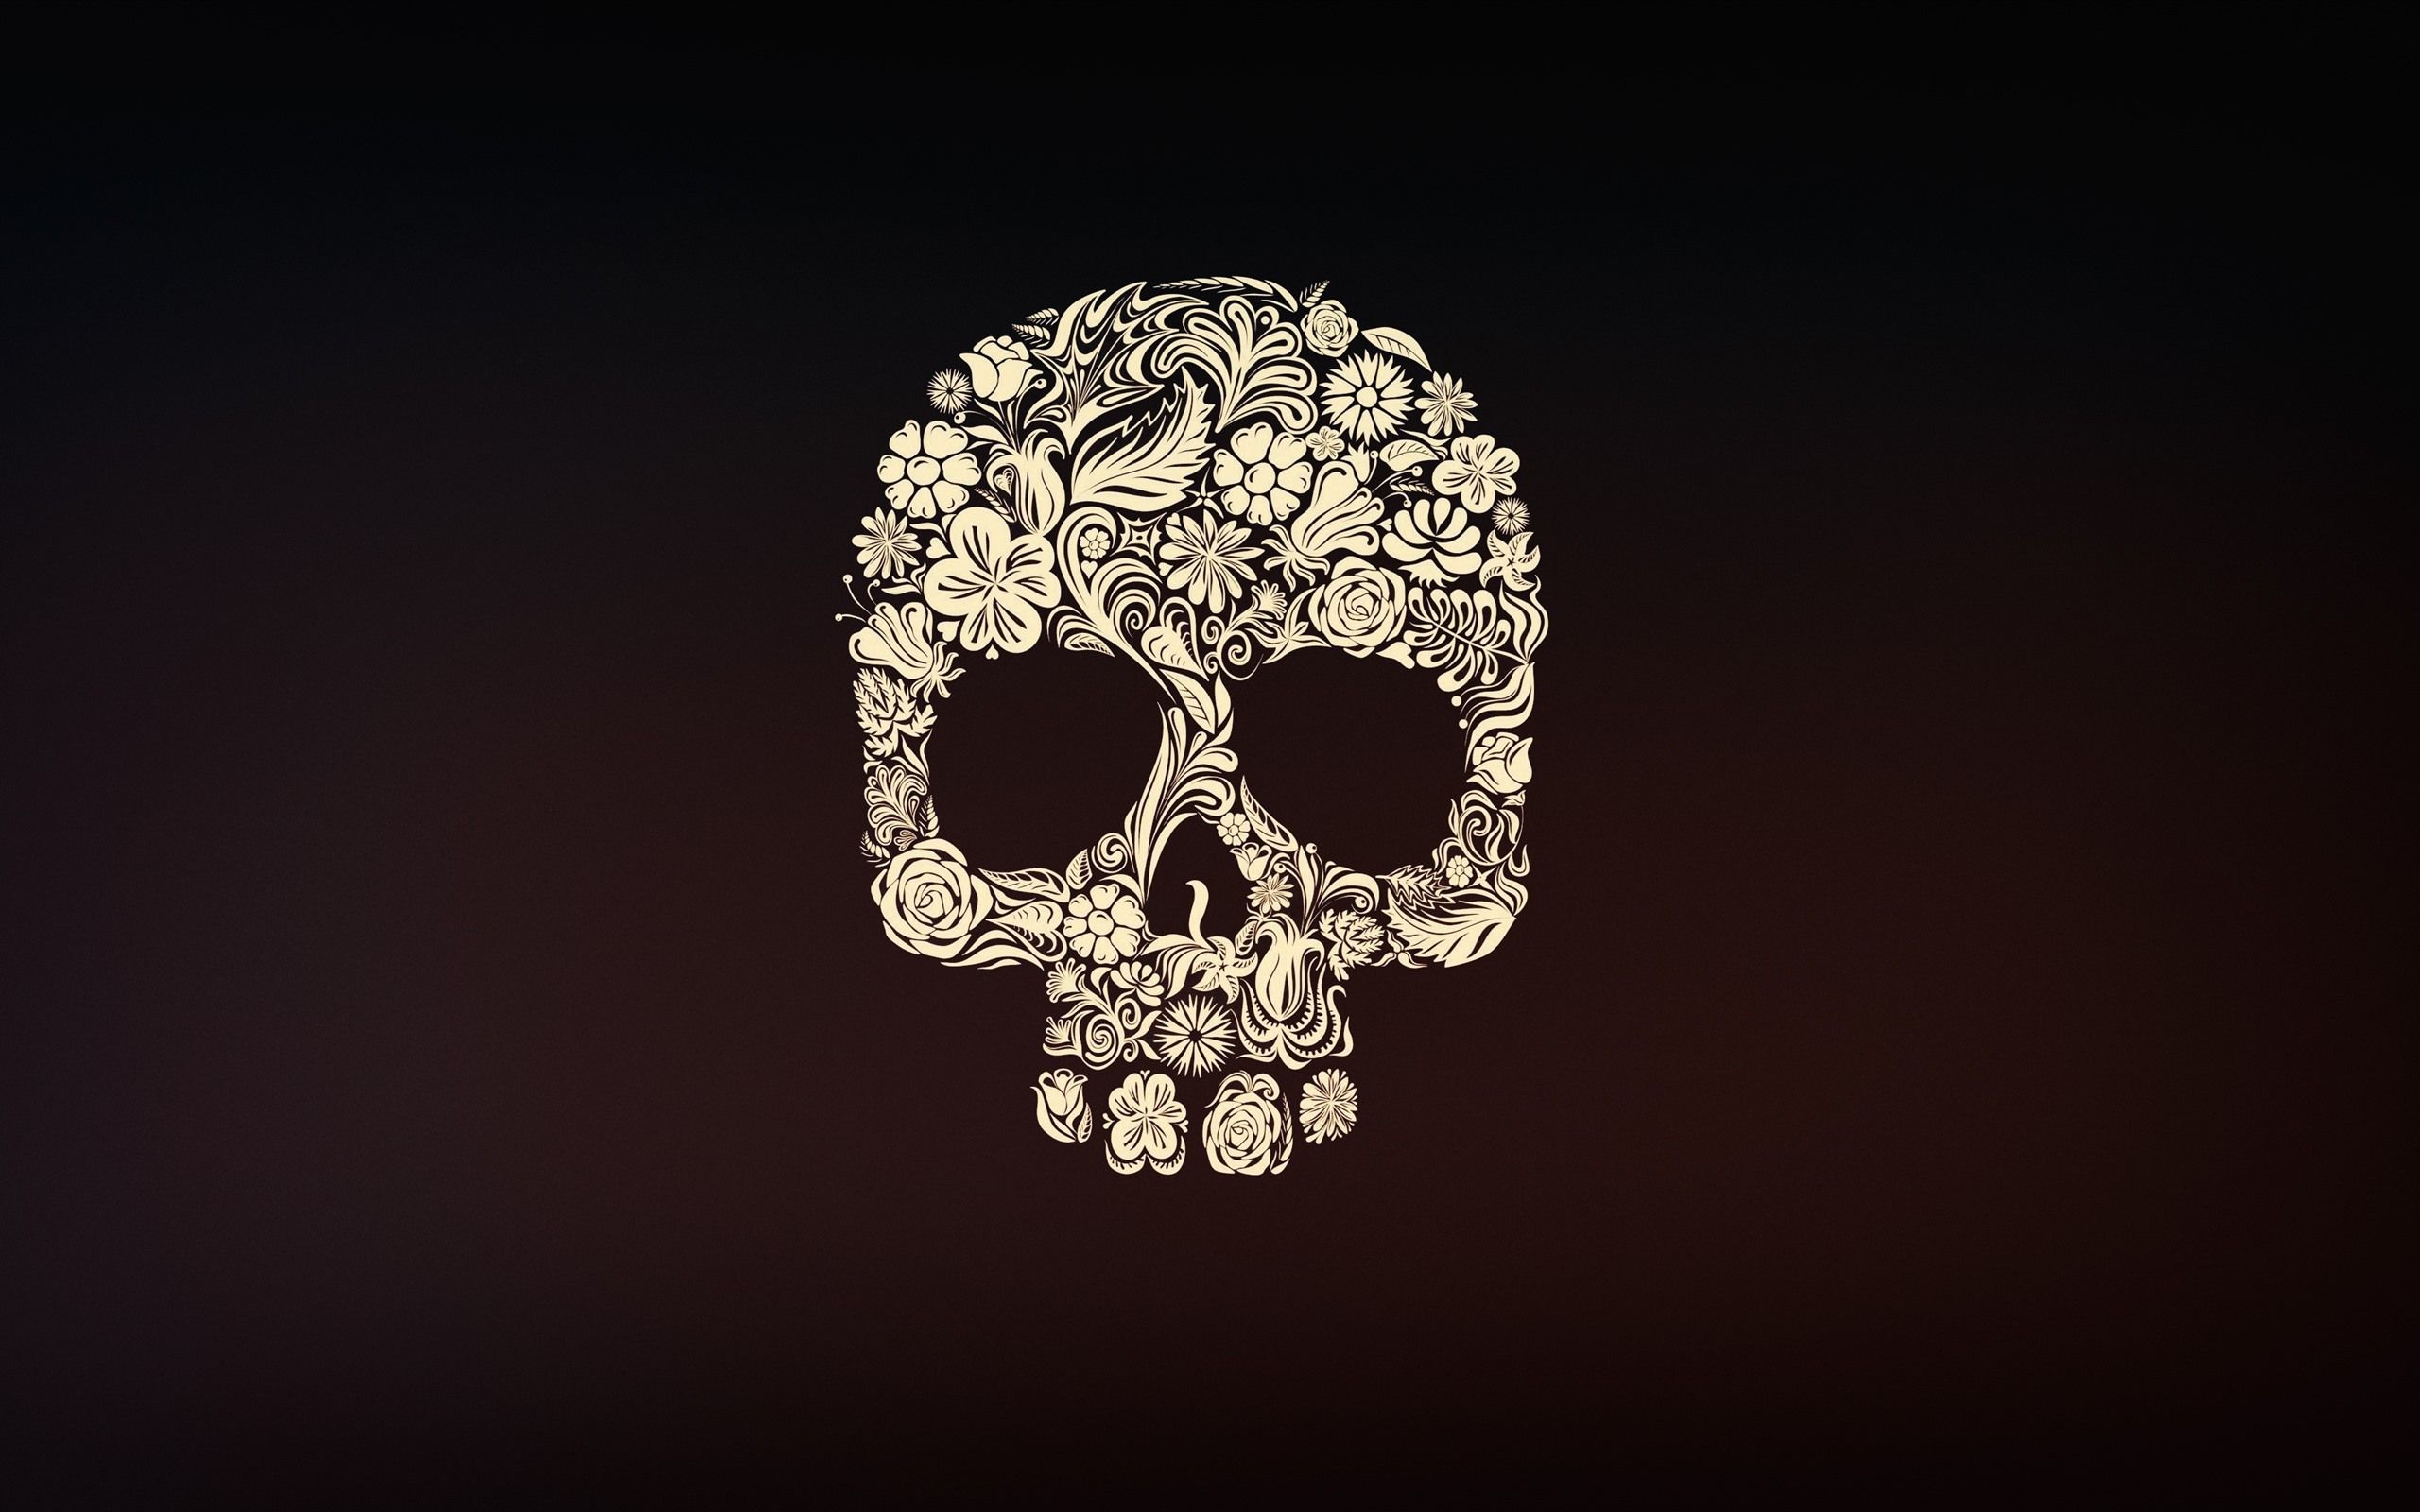 Skull With Flower Wallpapers - Wallpaper Cave